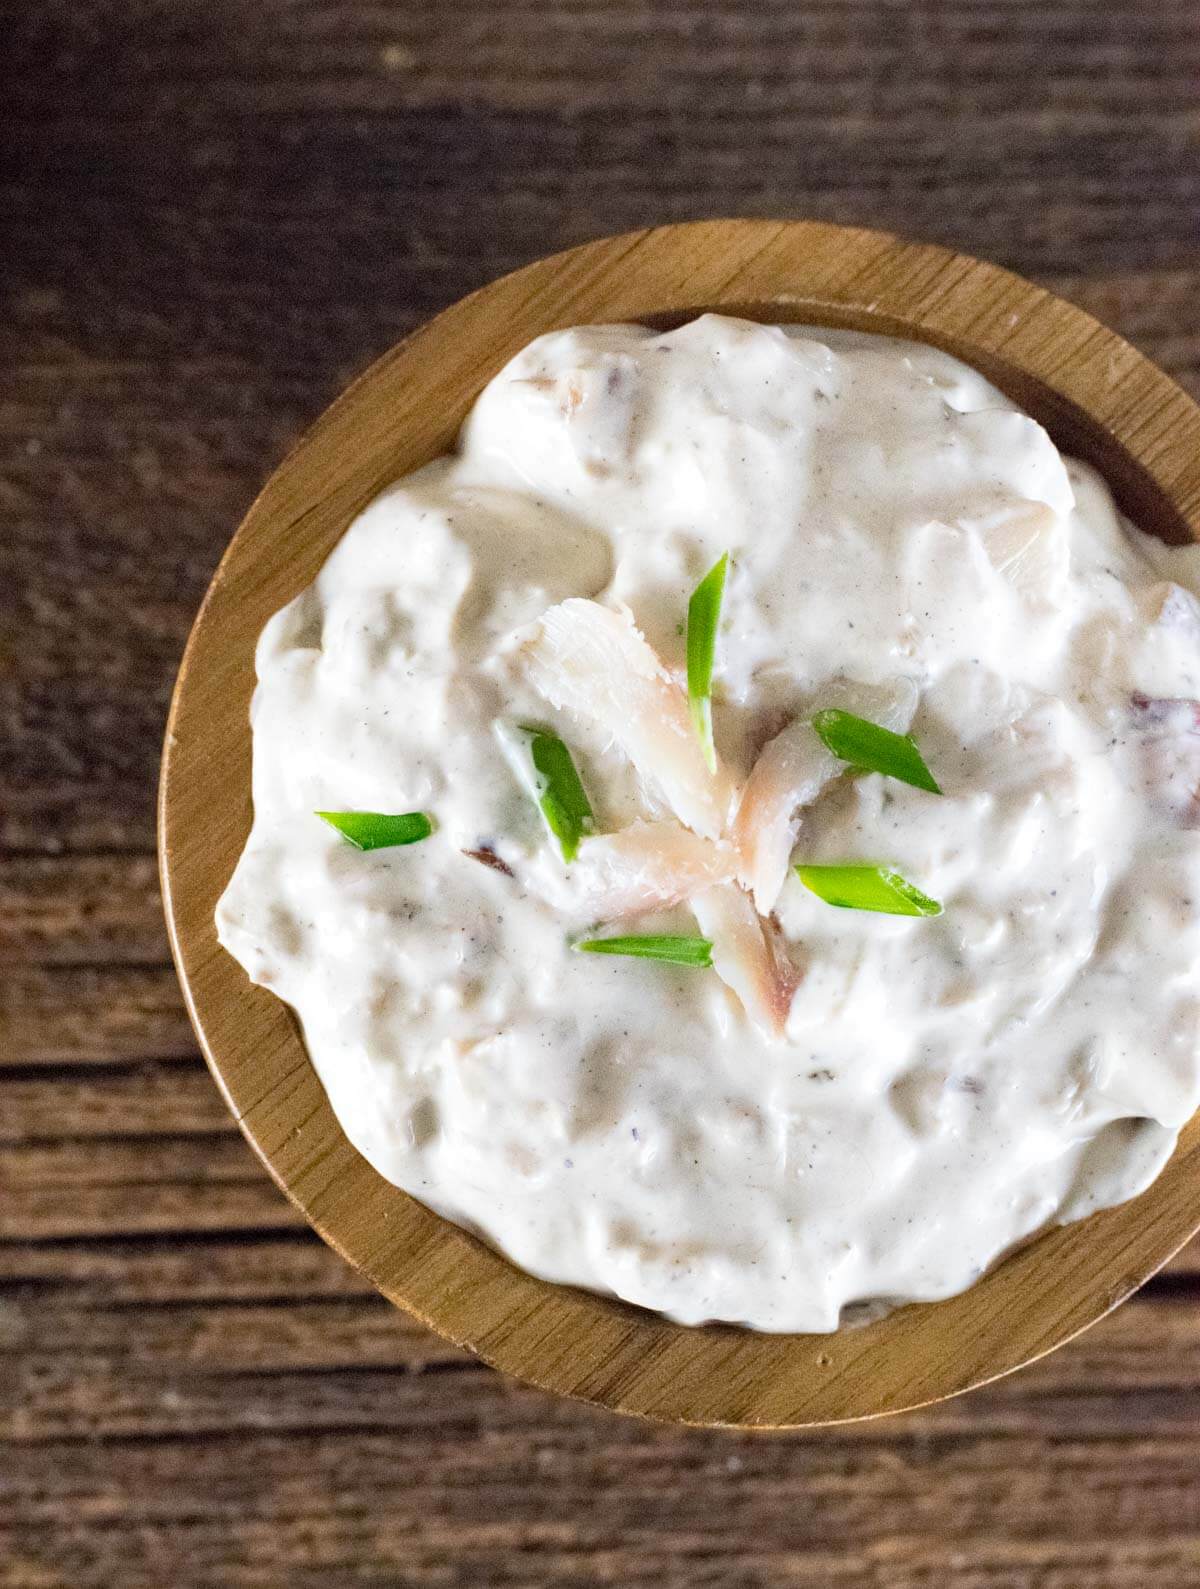 Smoked Trout Dip in wooden bowl.